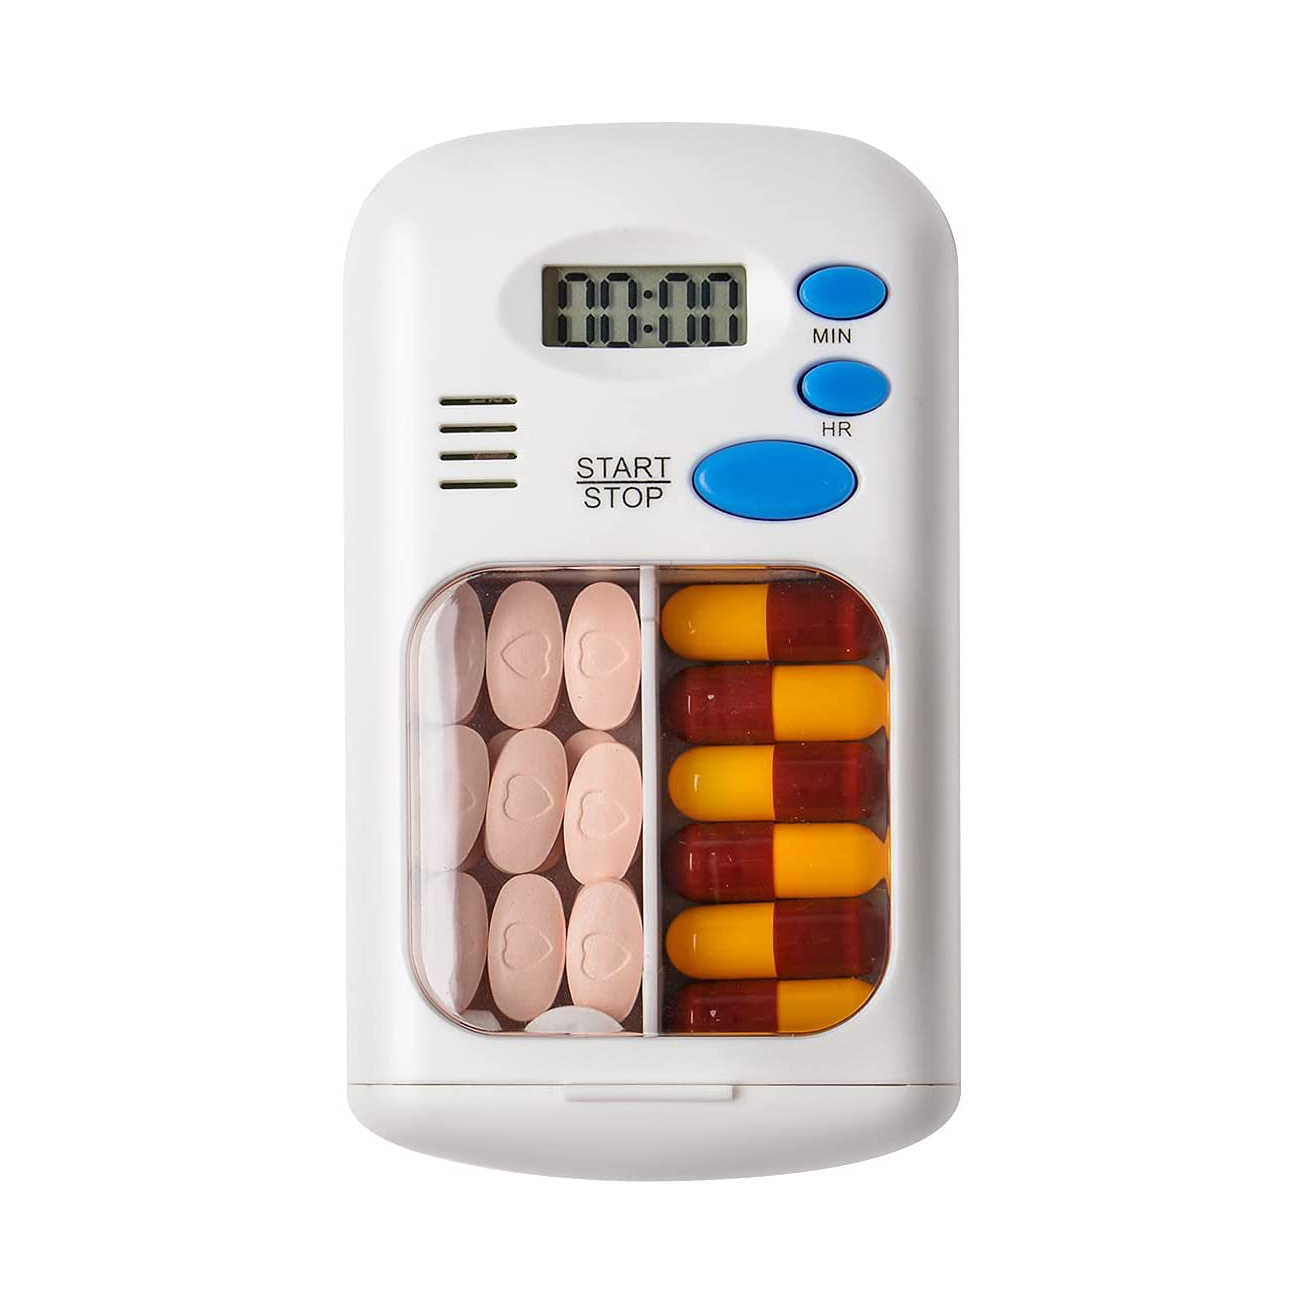 PB-40 Pill Reminder, Small Pill Box Automatic Medication Dispenser with Alarm, Medication Aids